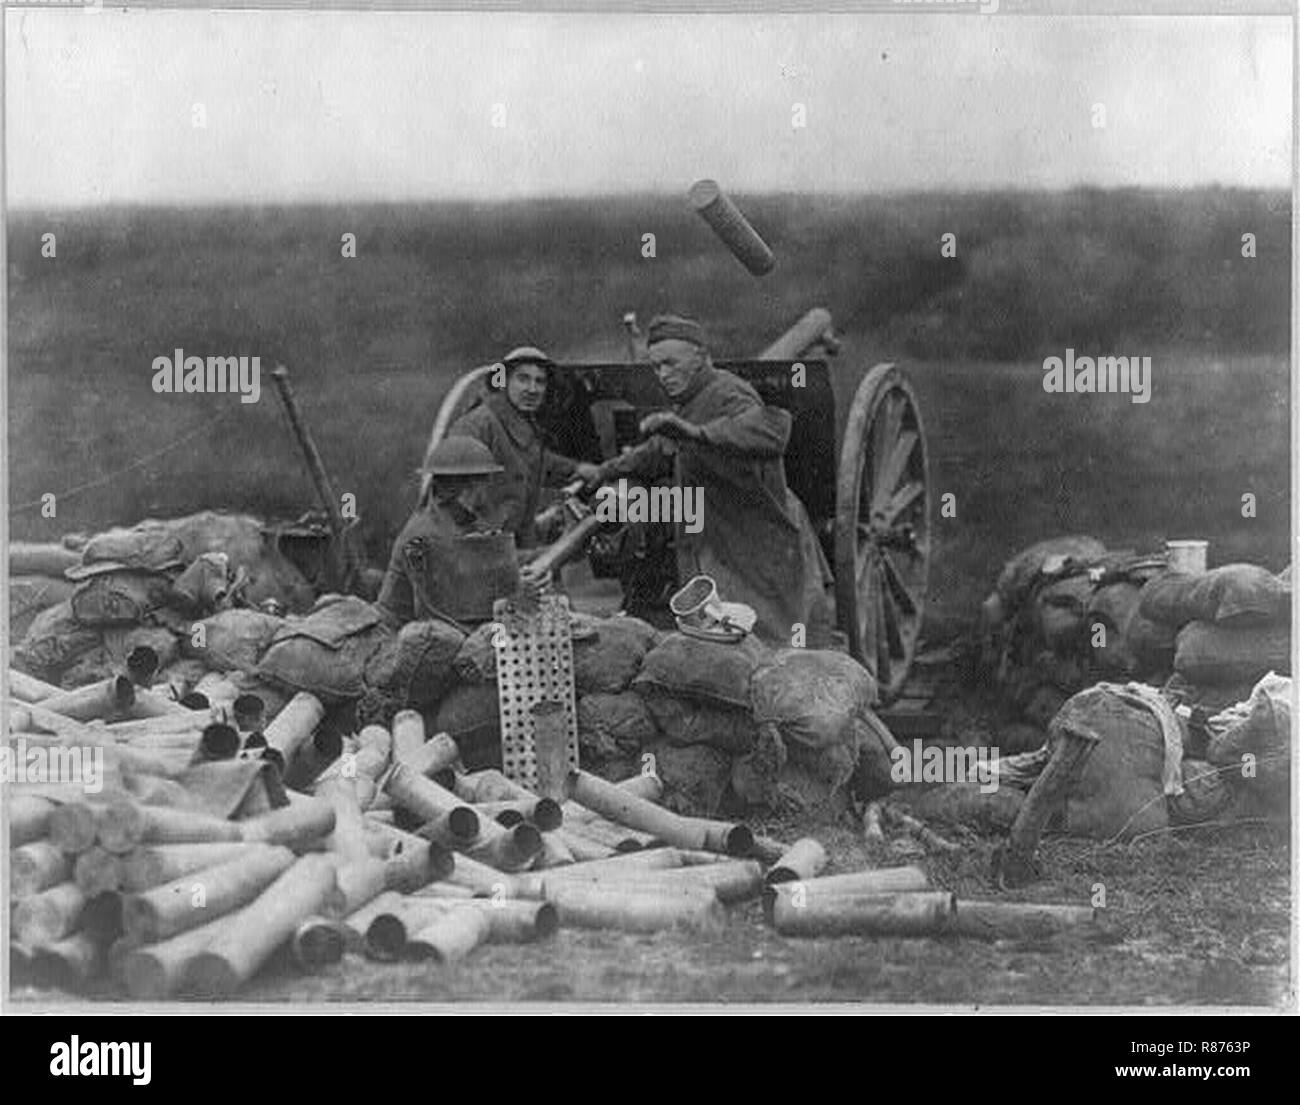 Capturing St. Mihiel Salient- 3 soldiers operating a cannon- pile of empty cannon shell casings in foreground. Stock Photo